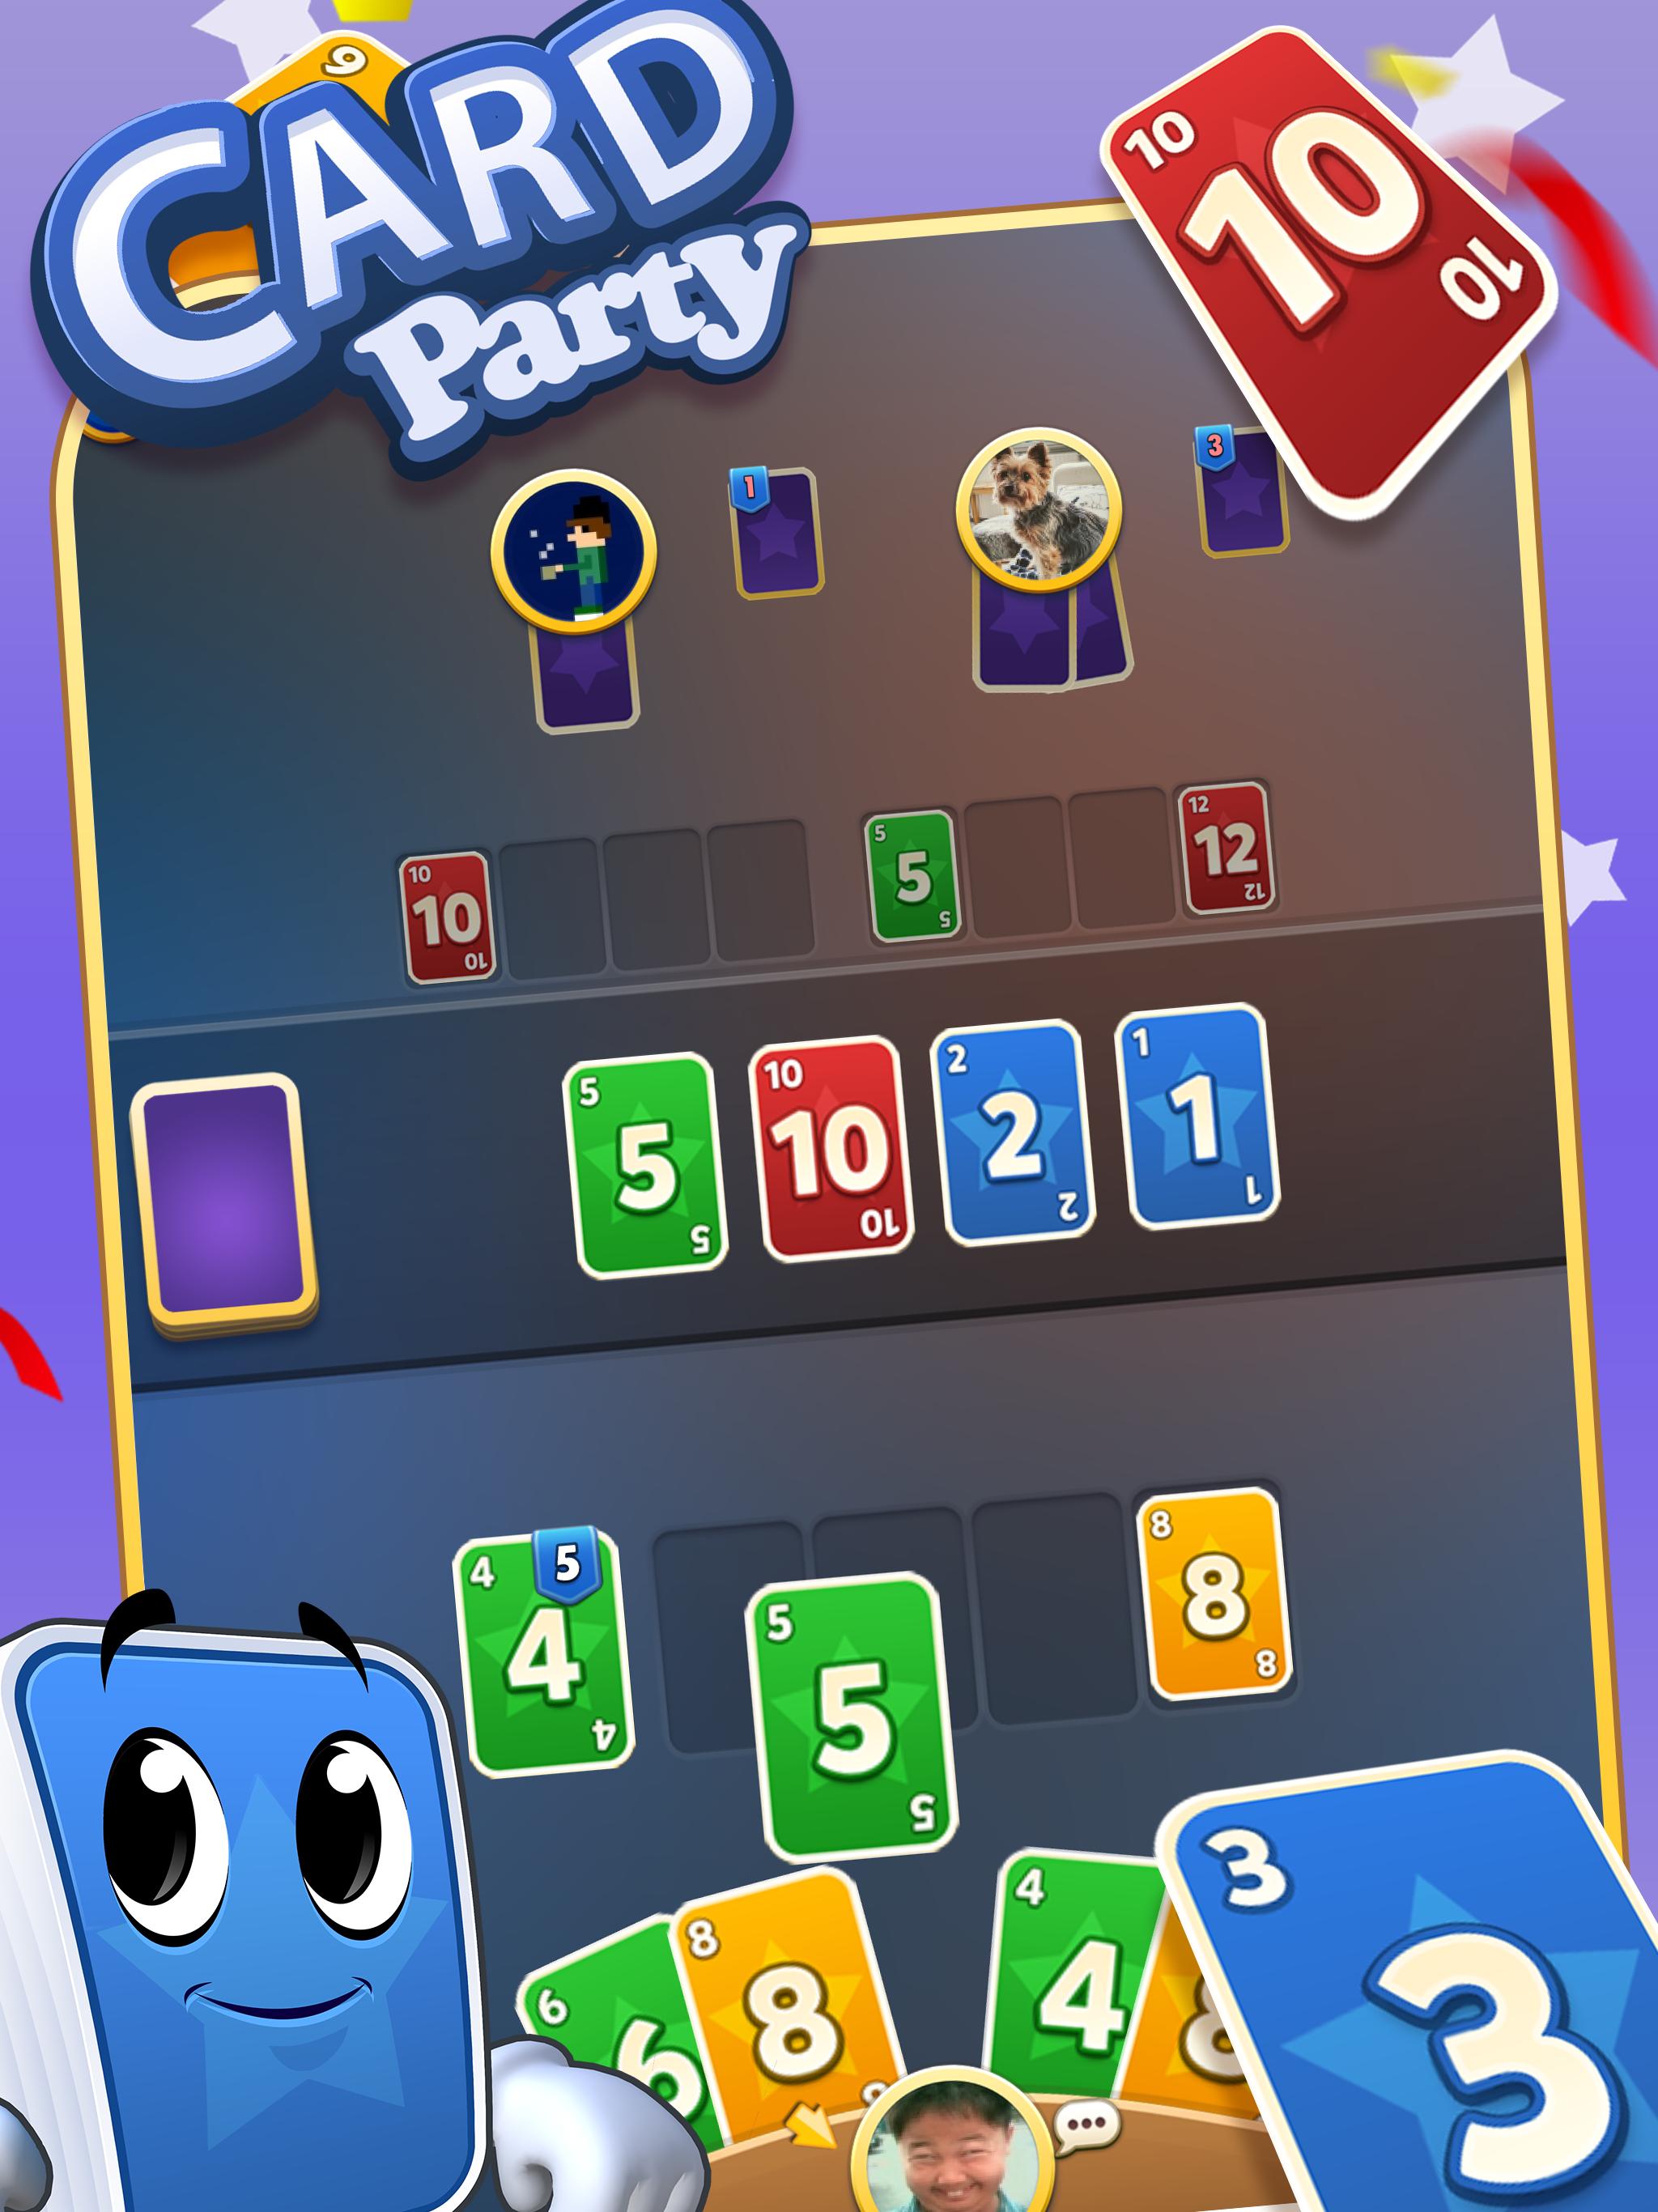 GamePoint CardParty 24357 Screenshot 15